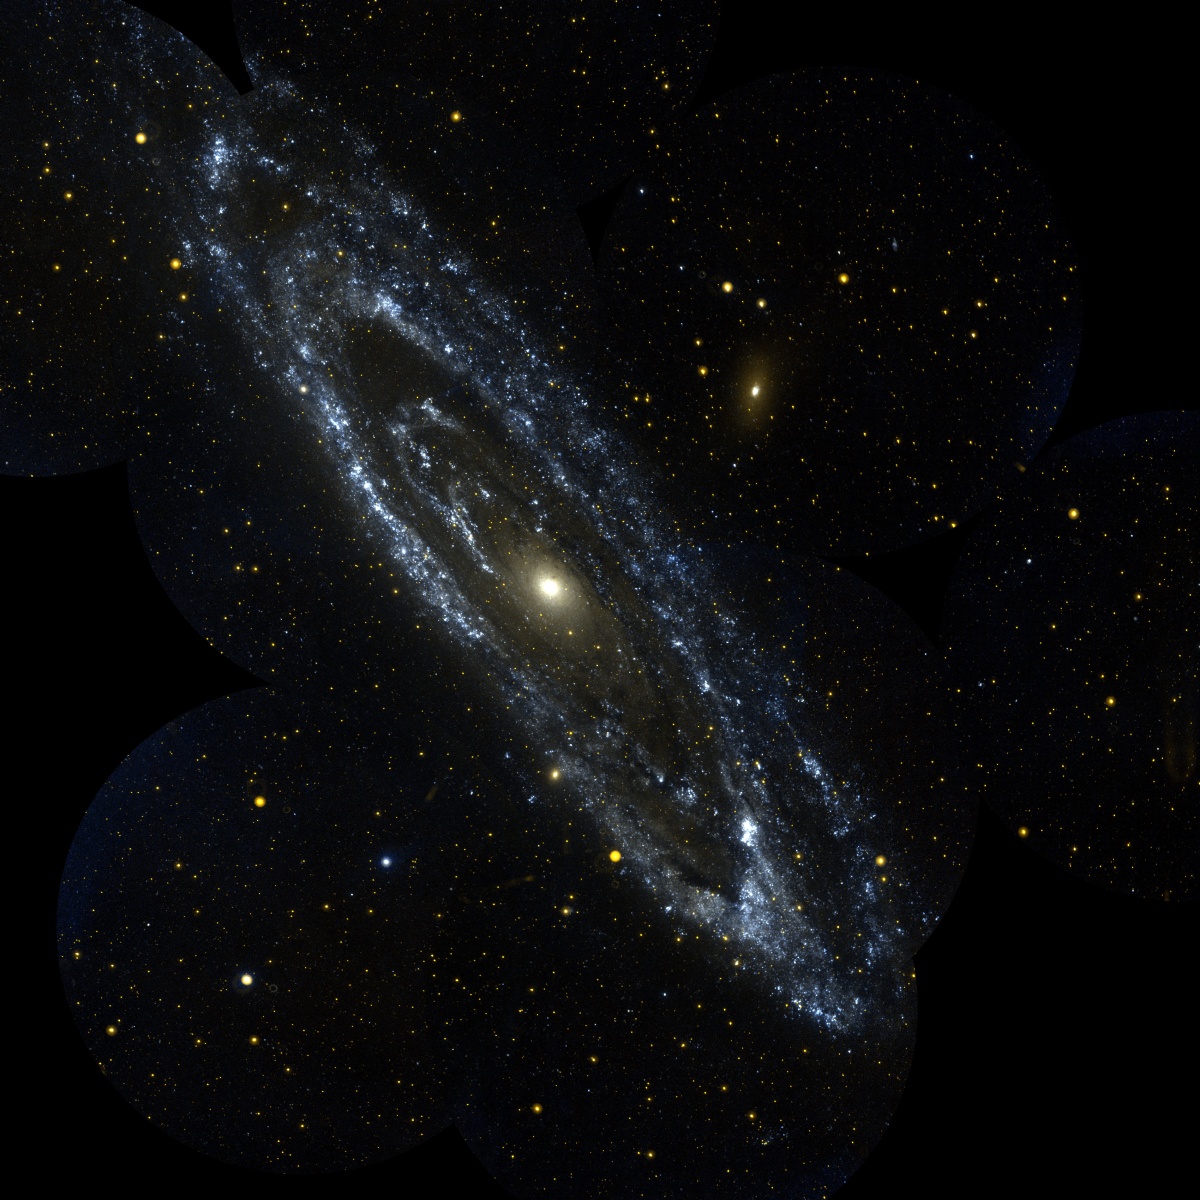 The Andromeda Galaxy from GALEX